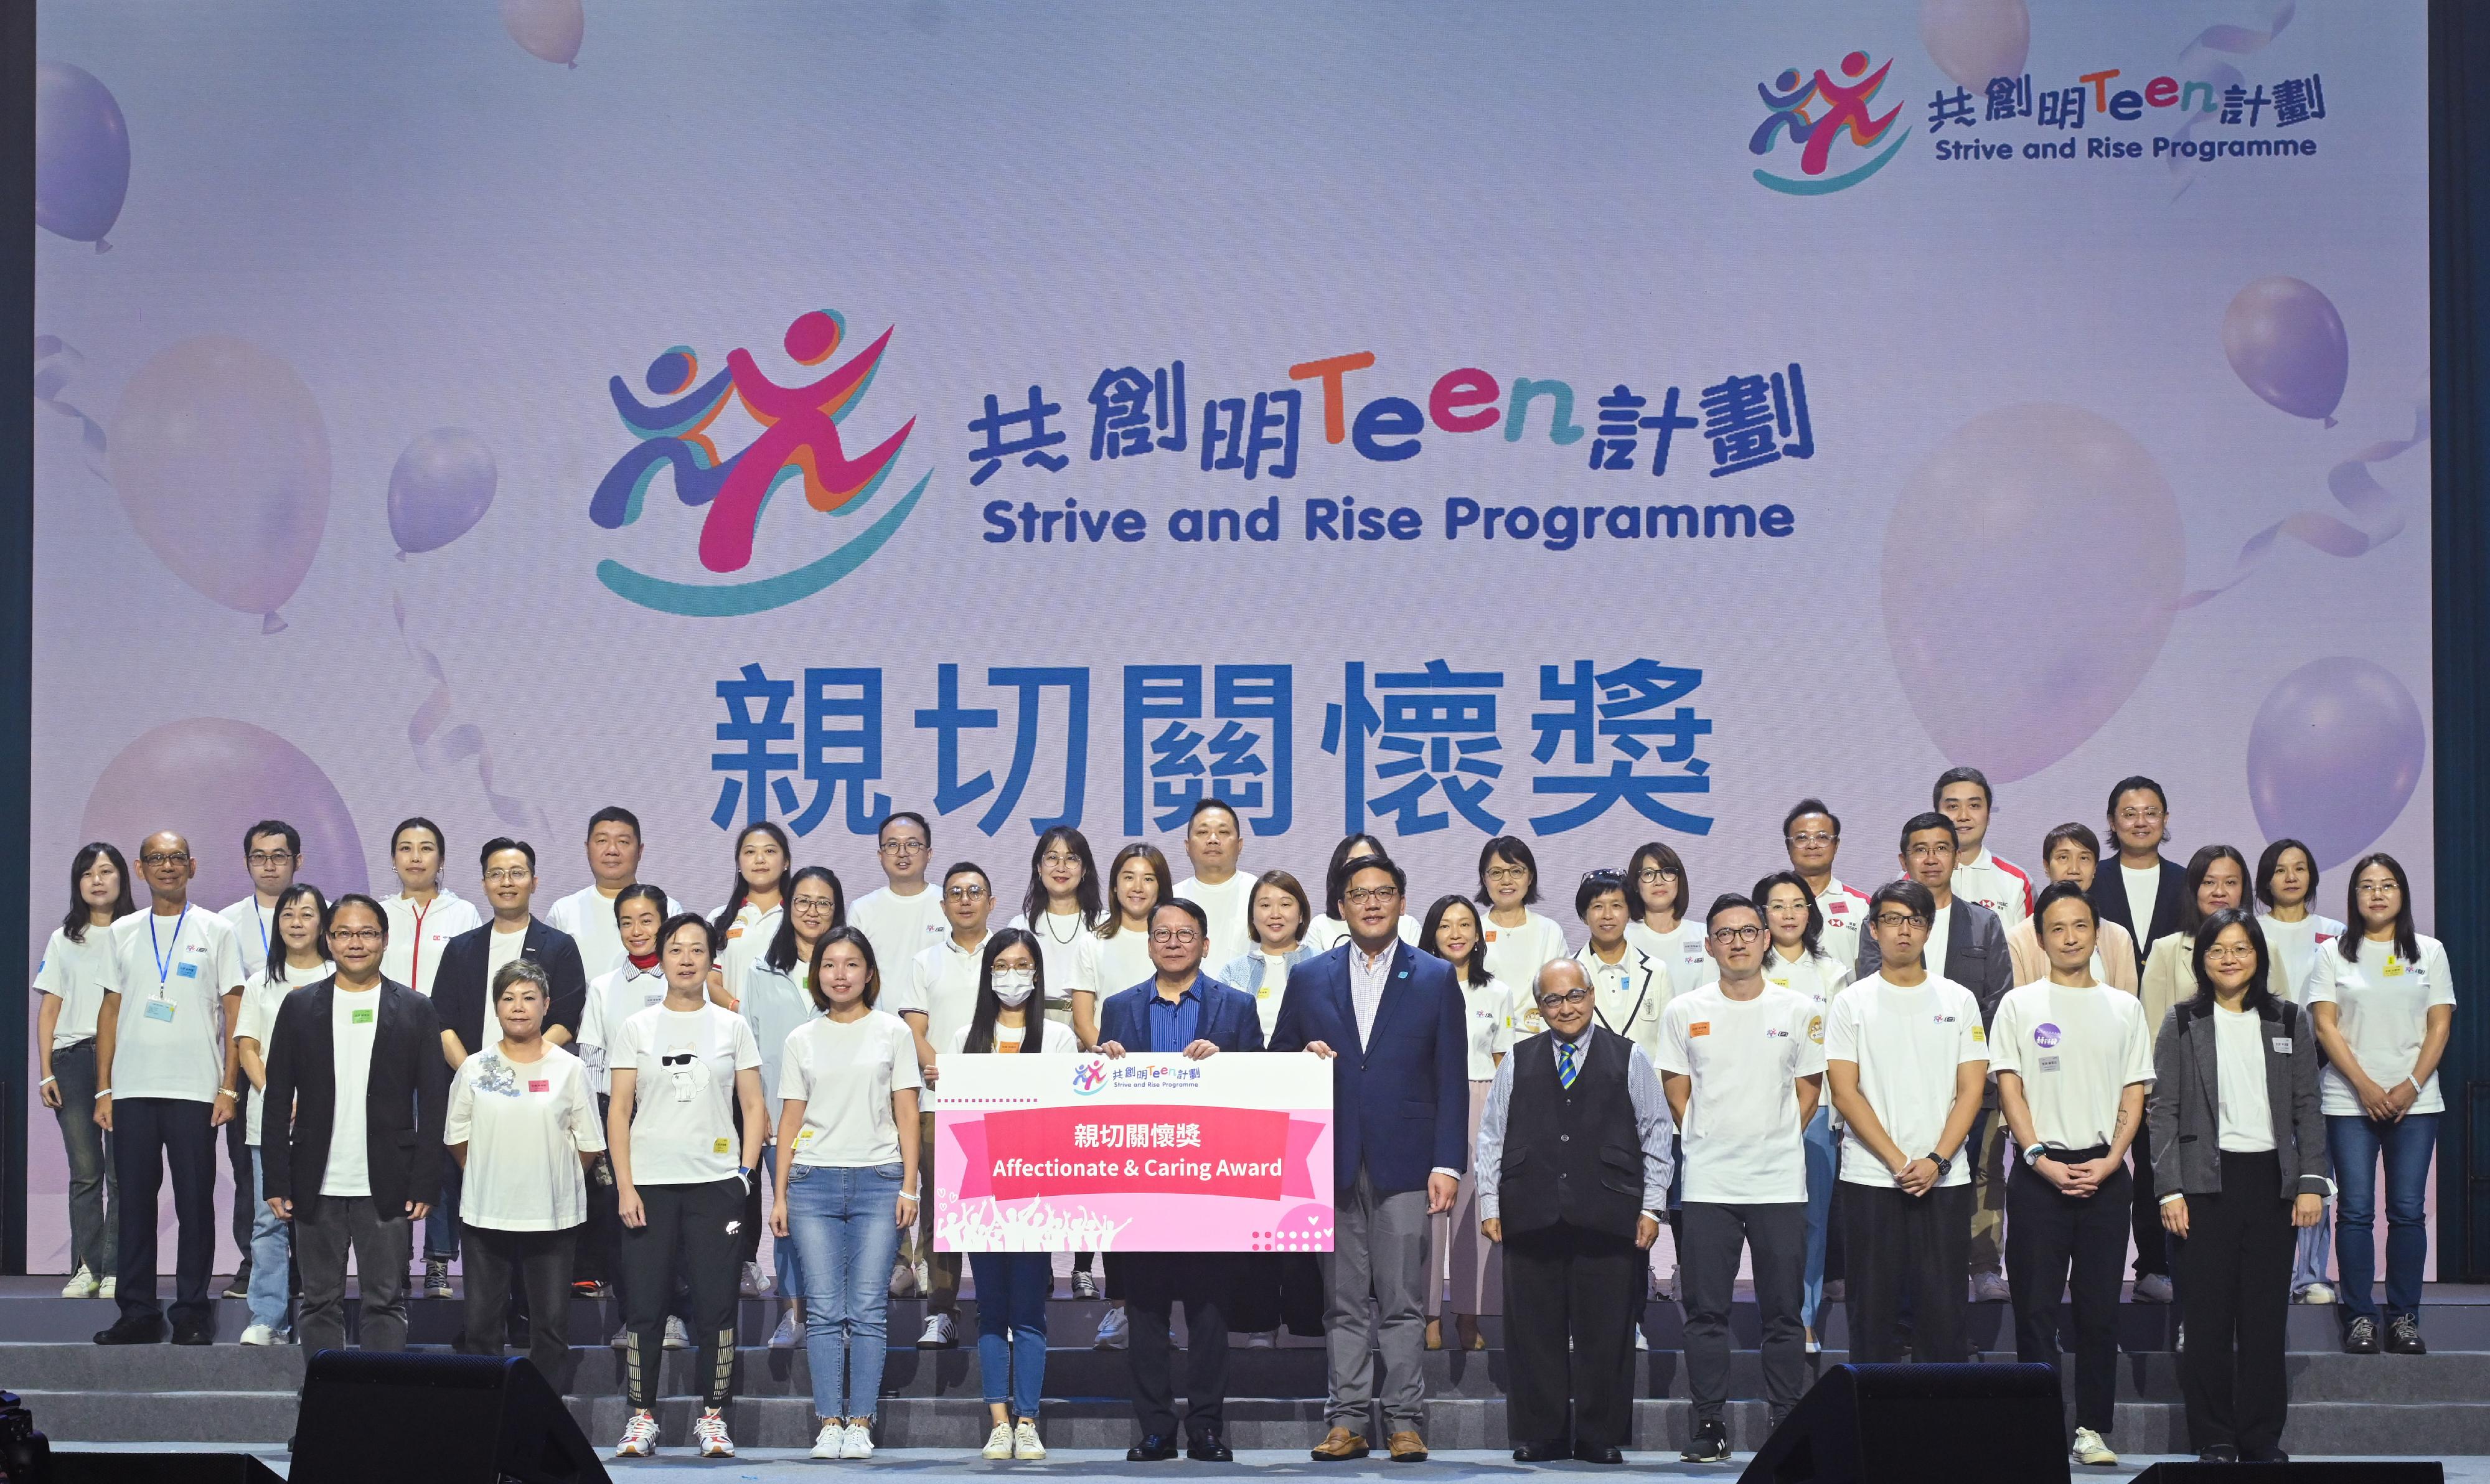 The Chief Secretary for Administration, Mr Chan Kwok-ki, attended the Graduation Ceremony of the Strive and Rise Programme today (November 4). Photo shows Mr Chan (front row, sixth left) and the Under Secretary for Home and Youth Affairs, Mr Clarence Leung (front row, sixth right), with awarded mentors.
